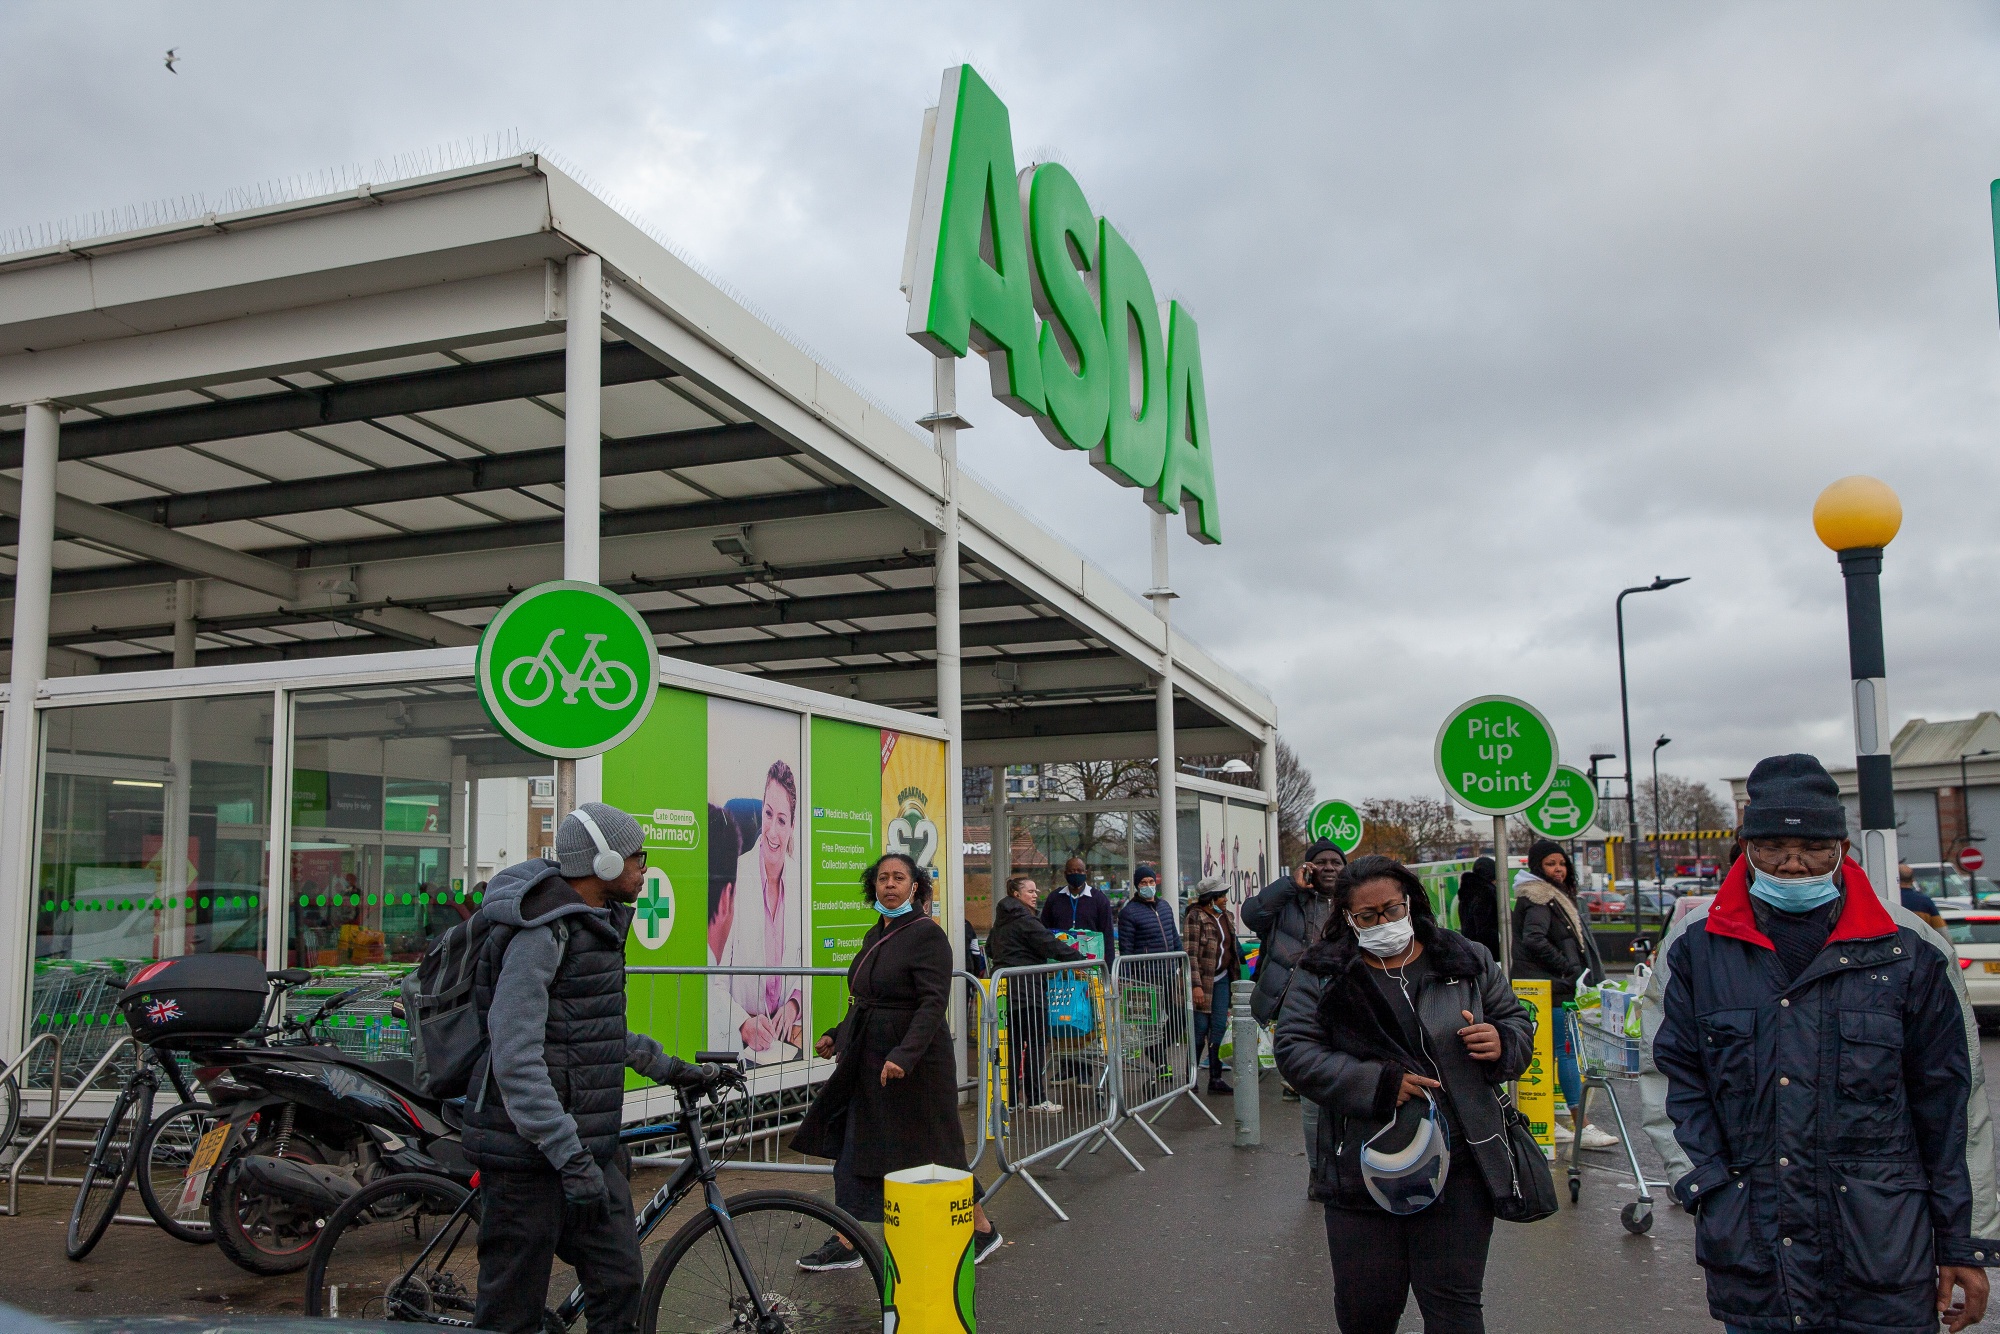 Shoppers race to Asda to snap up bargain buys in the store's mega sale -  including bras scanning for £2